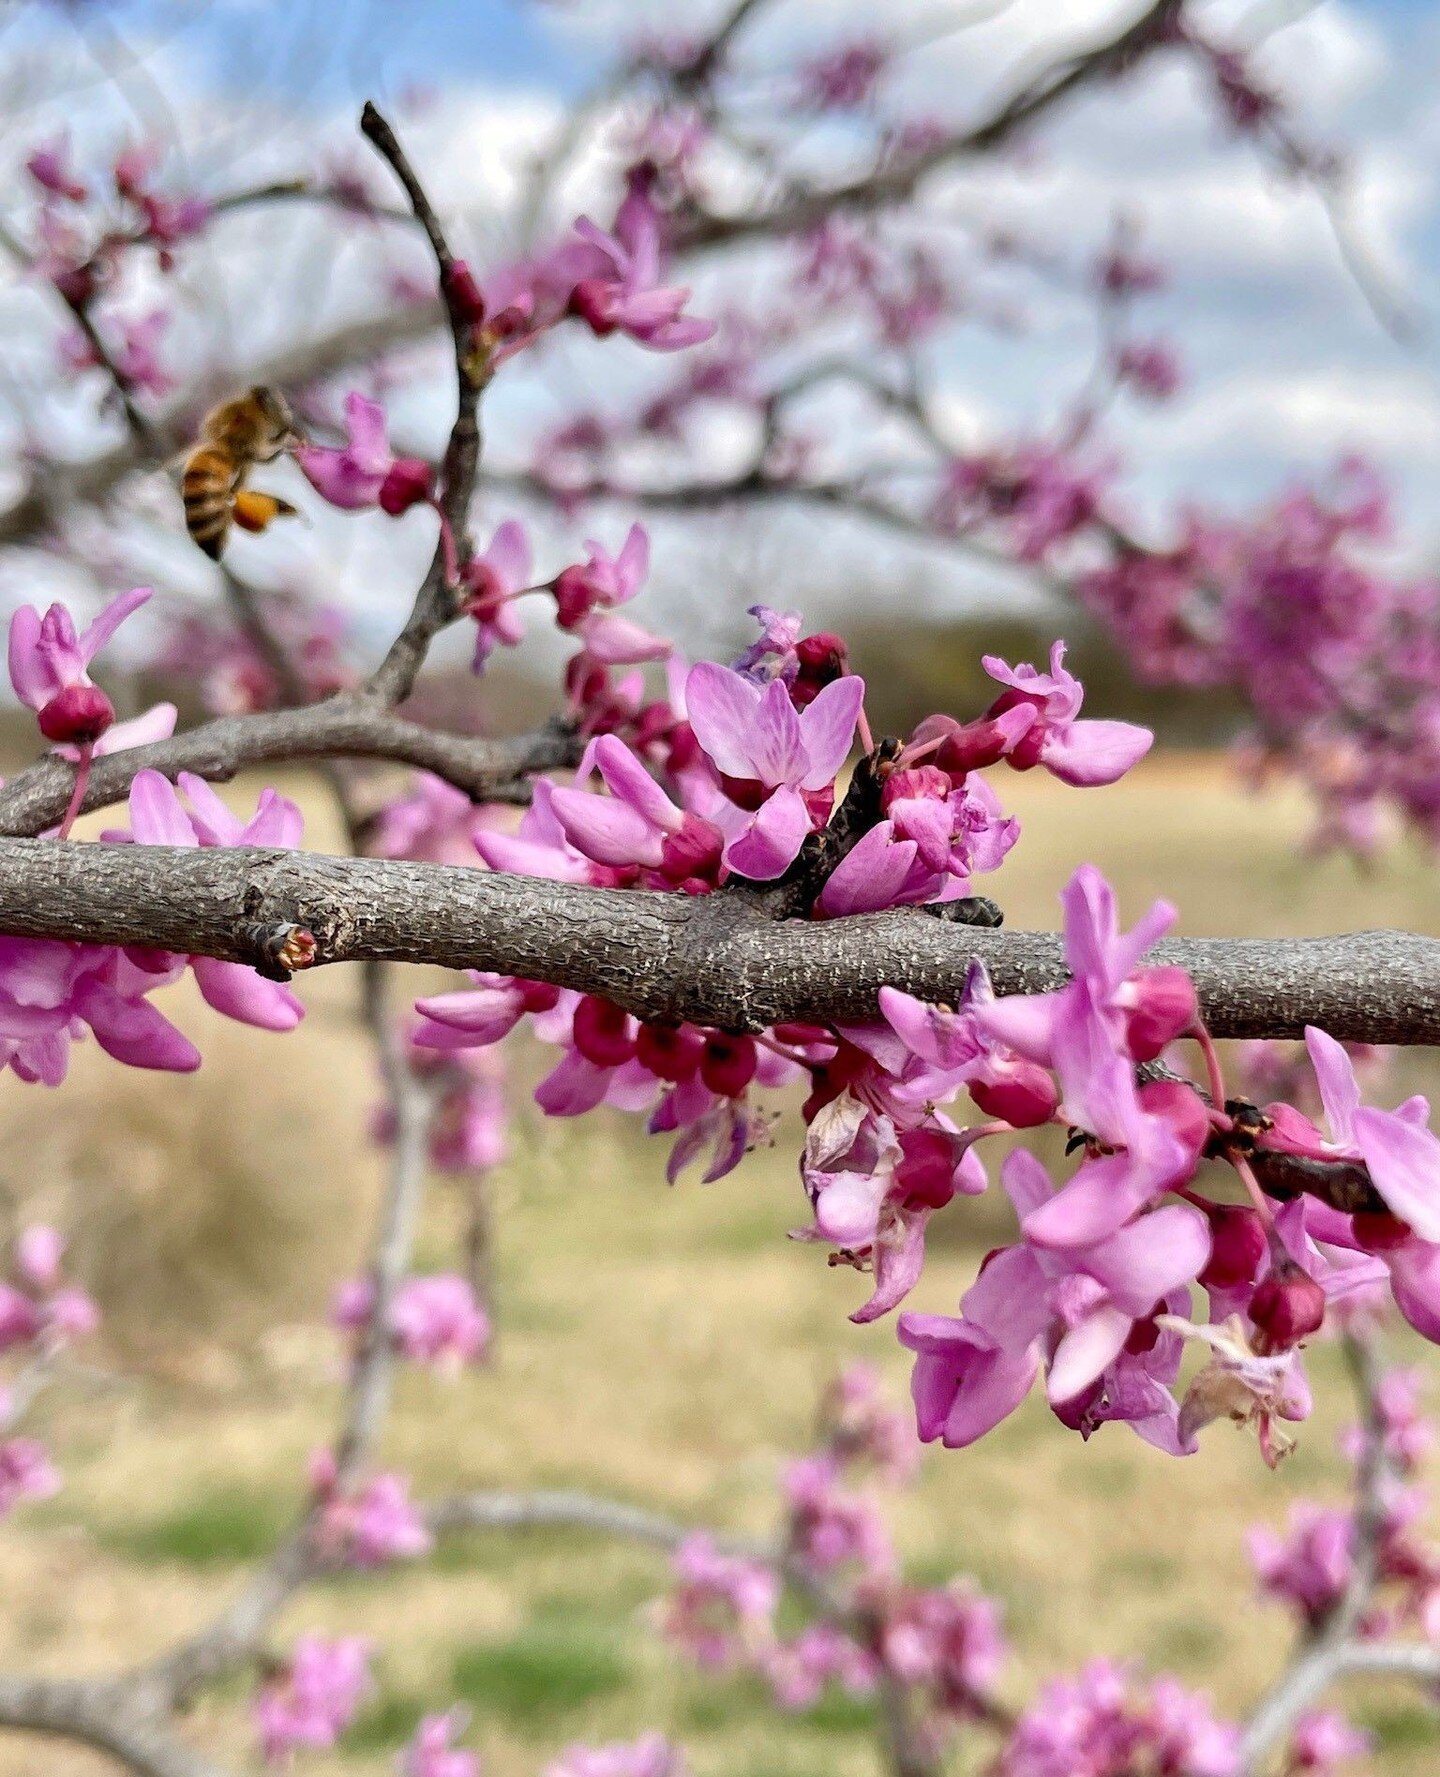 One of our favorite ornamental trees is Texas redbud, an iconic early spring bloomer! Because of the unseasonably warm temperatures, spring is arriving early this year and with that the bare limbs of redbuds are bursting with fuchsia blooms.